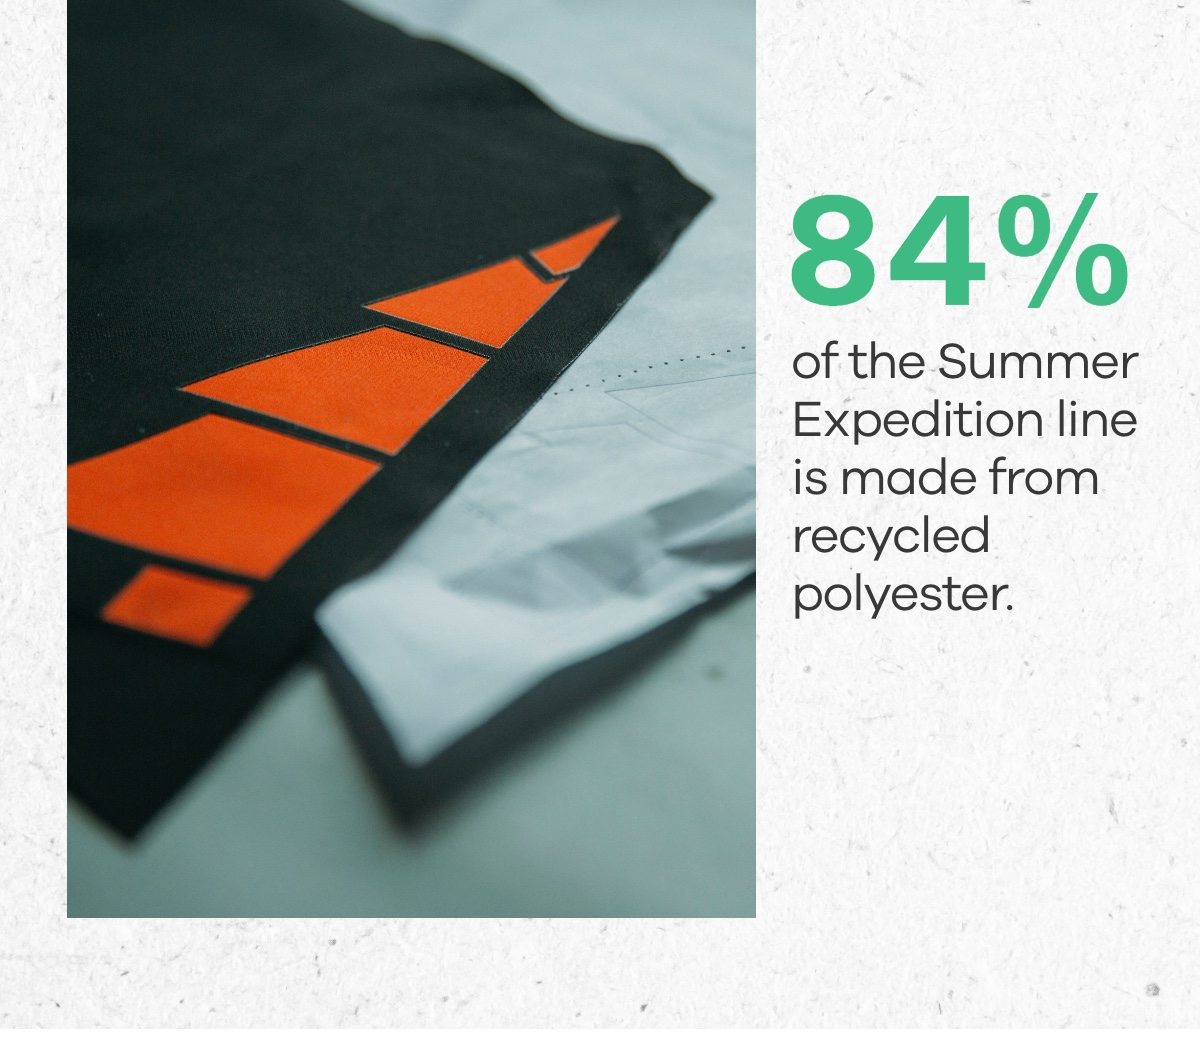 84% of the Summer Expedition line is made from recycled polyester